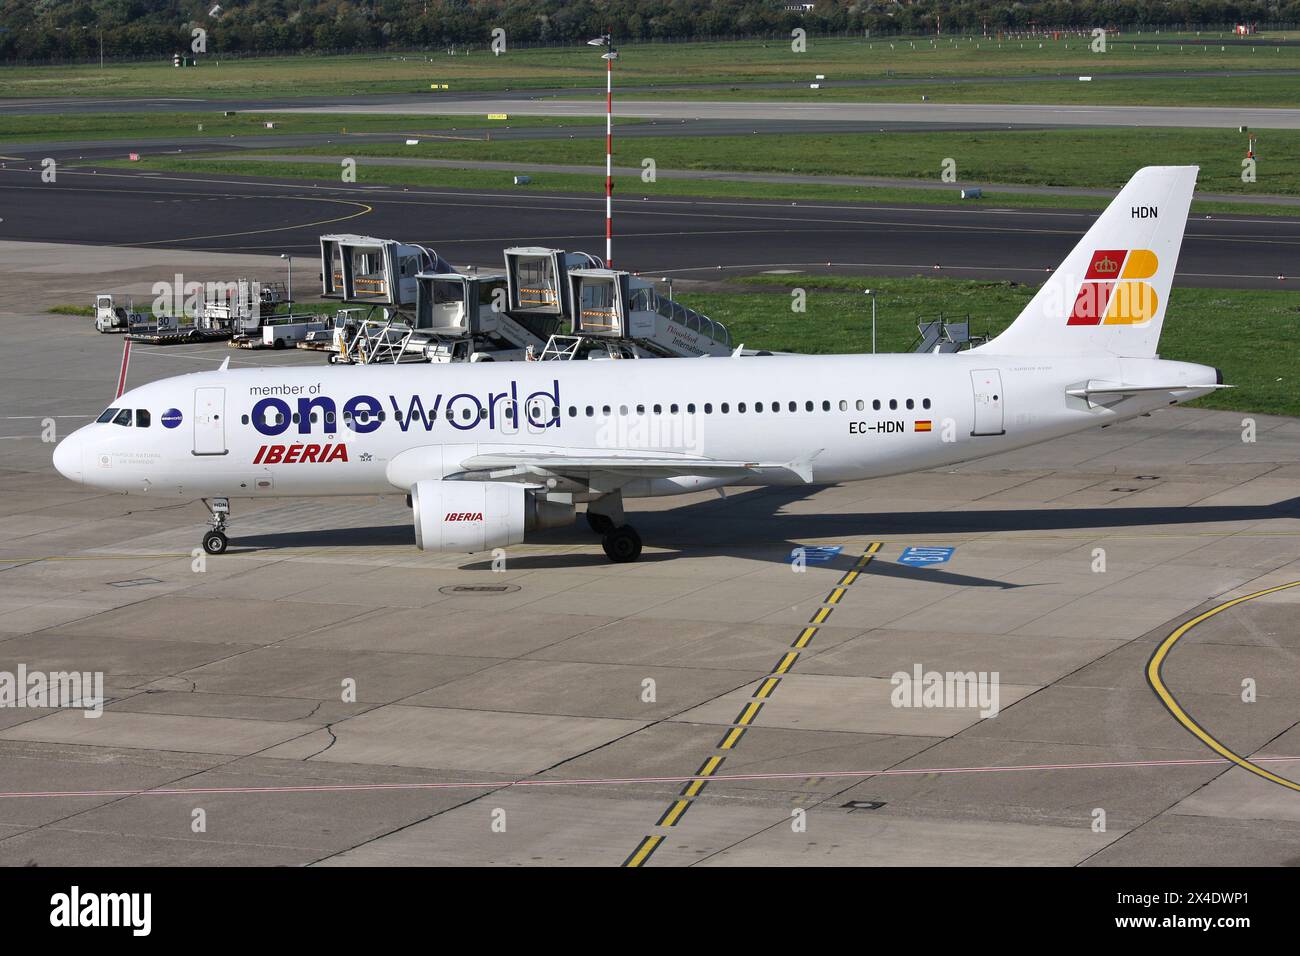 Spanish Iberia Airbus A320-200 with registration EC-HDN in Oneworld Alliance livery at Dusseldorf Airport Stock Photo